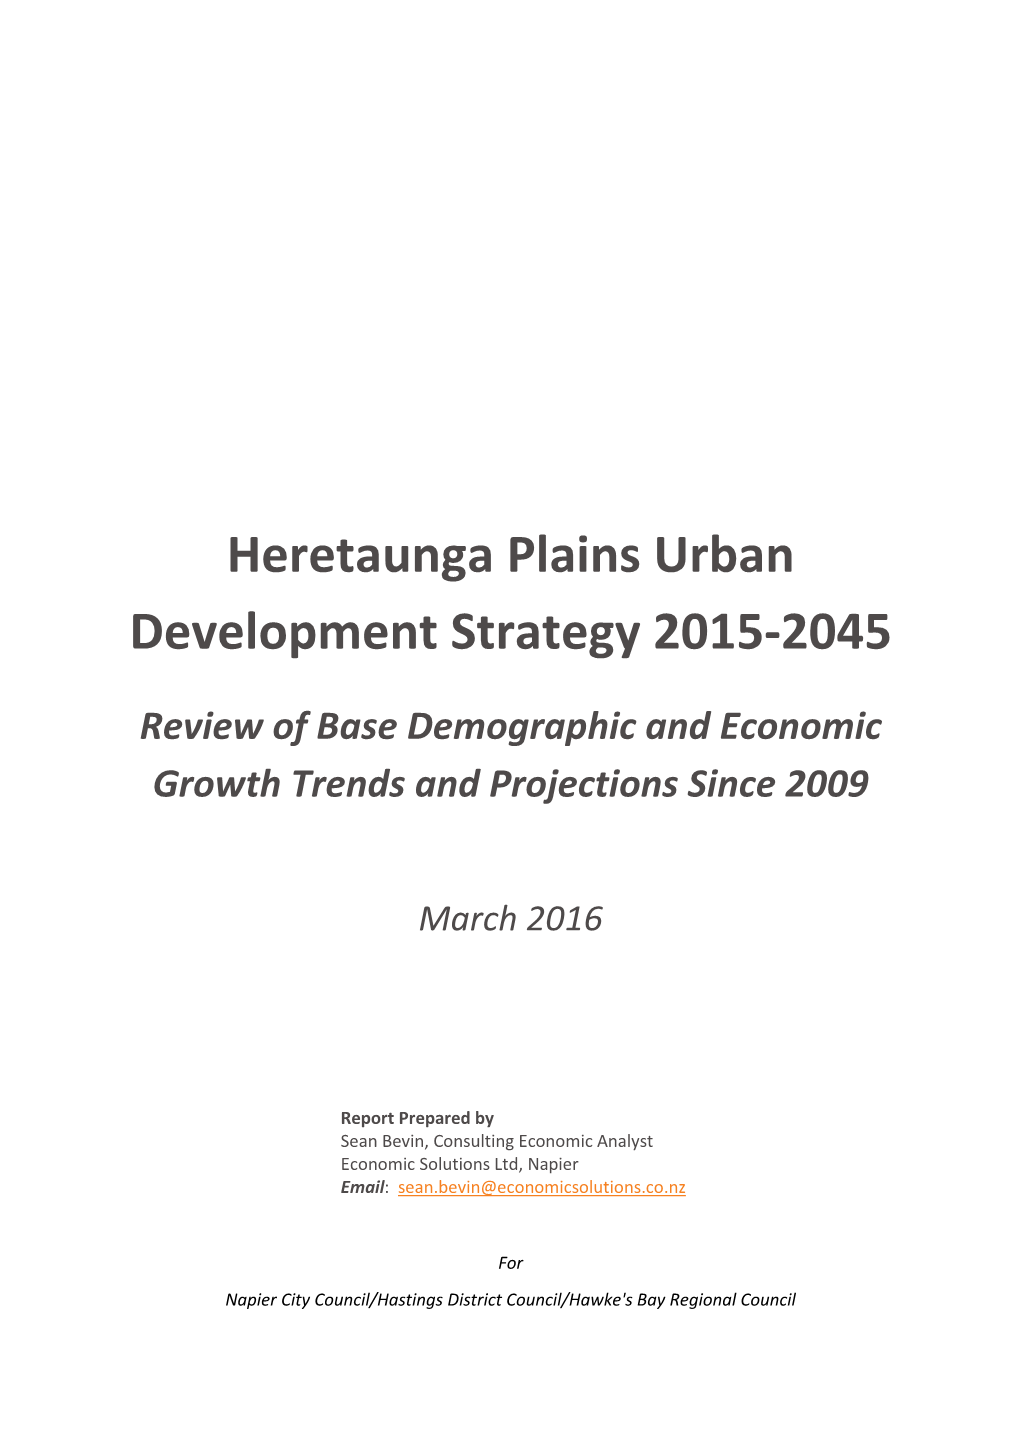 Review of Base Demographic and Economic Growth Trends and Projections Since 2009